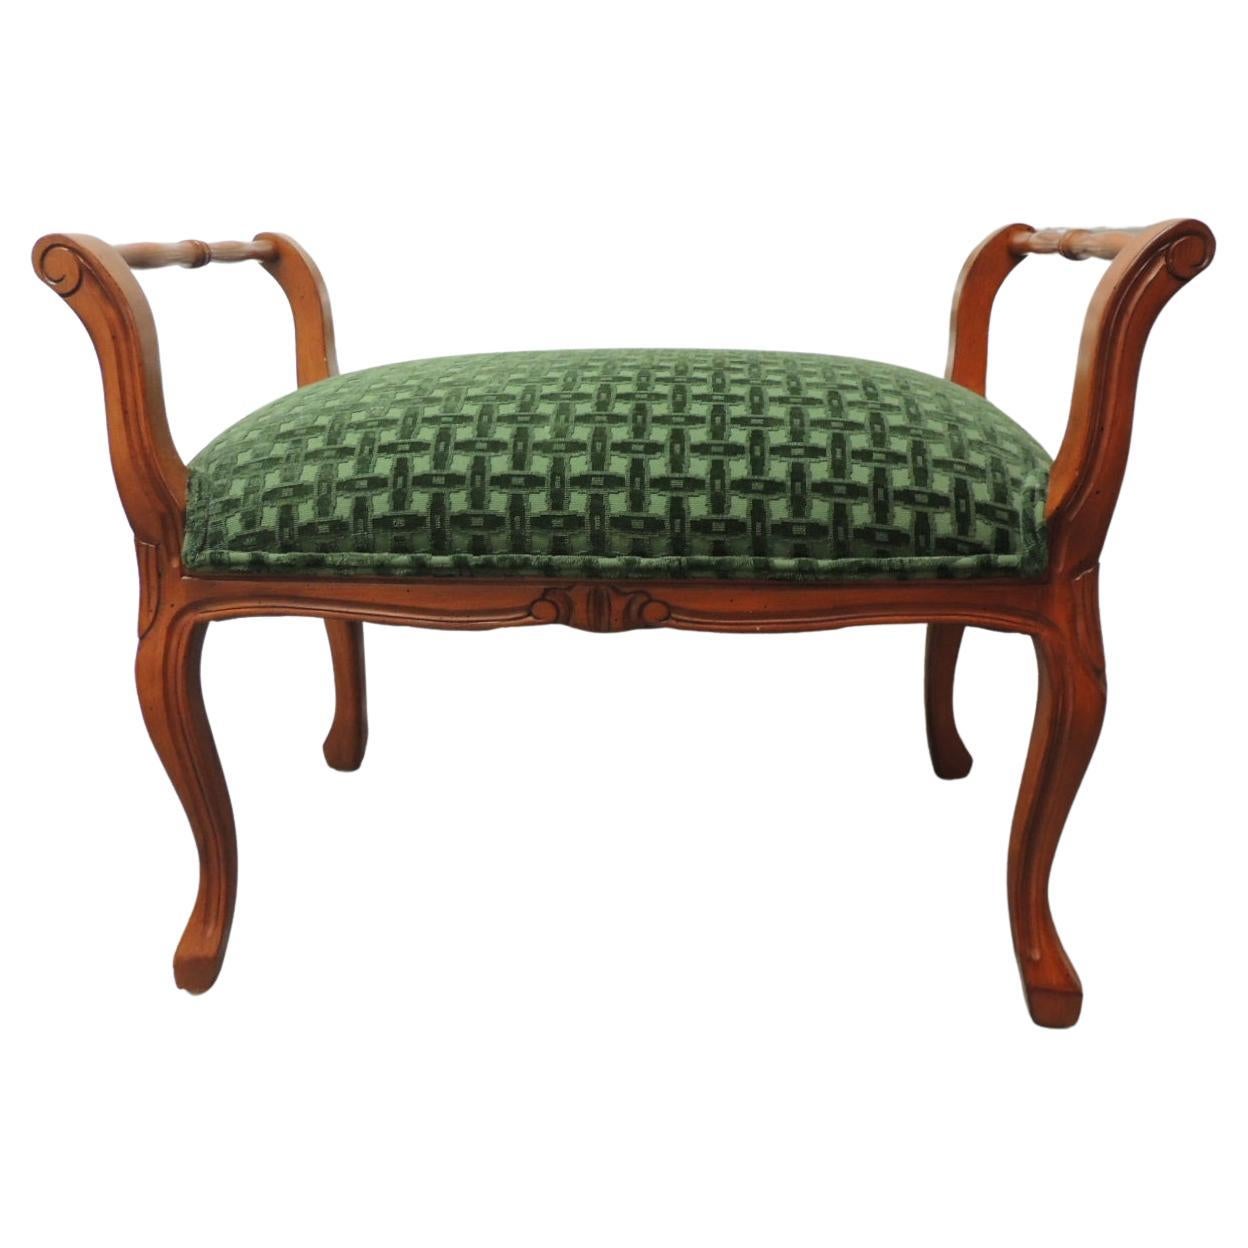 Italian Wood Carved Upholstered Bench